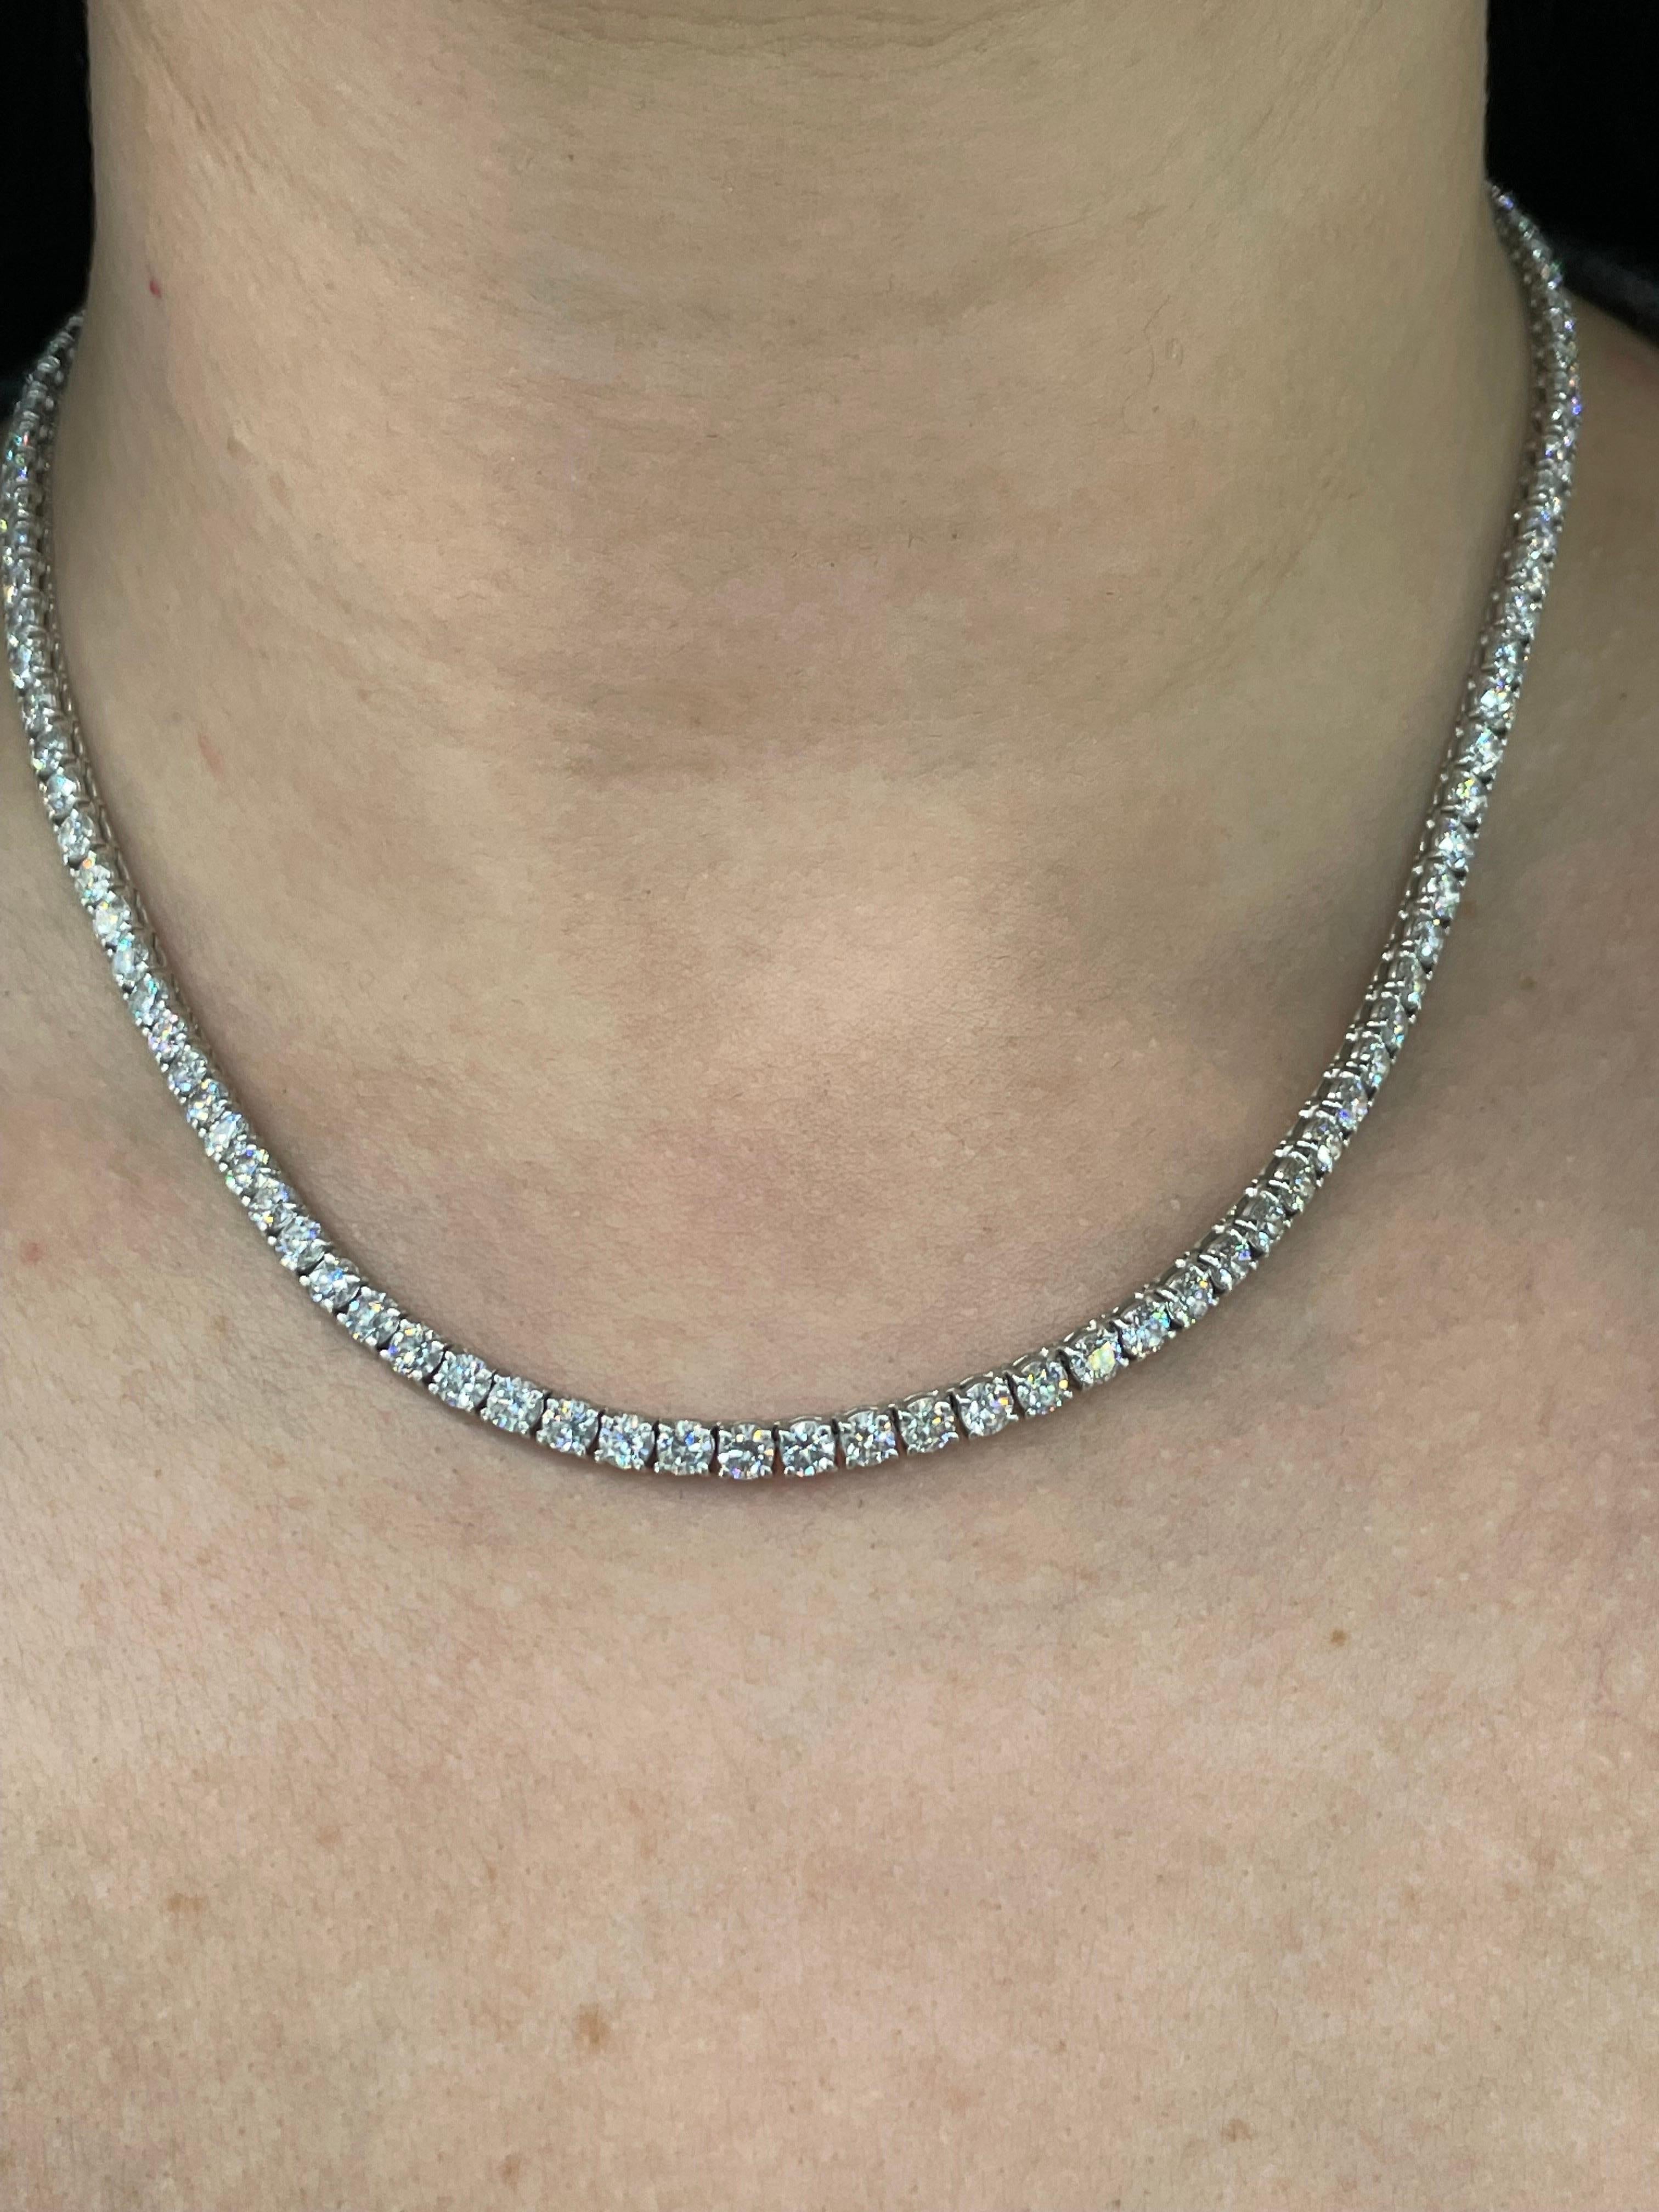 Diamonds Straight Line Necklace 17.25 Carats 14k White Gold 0.15 PTS For Sale 2